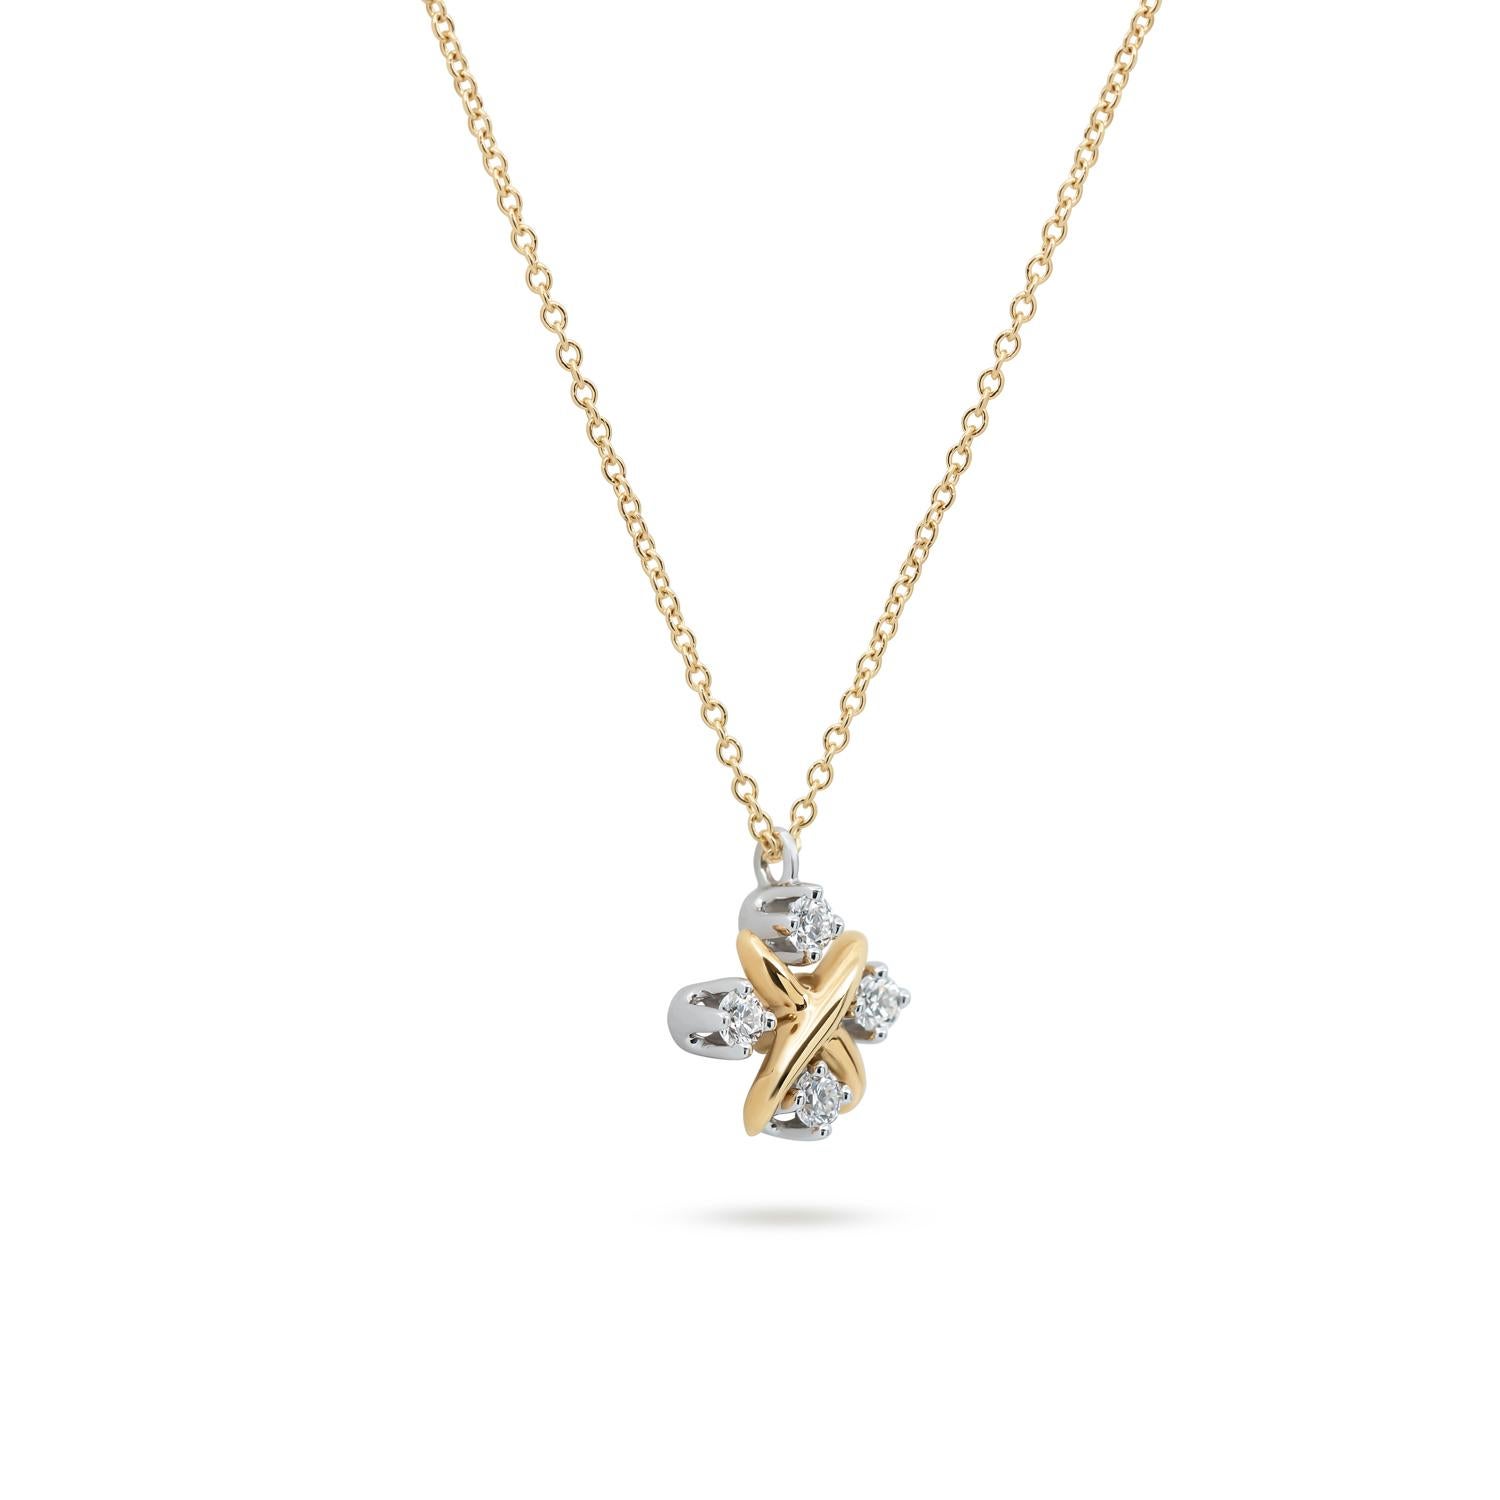 Indulge in the epitome of luxury with the Tiffany & Co. Schlumberger Diamond Pendant necklace. Meticulously crafted in platinum and 18k yellow gold, this exquisite piece exudes opulence. The 